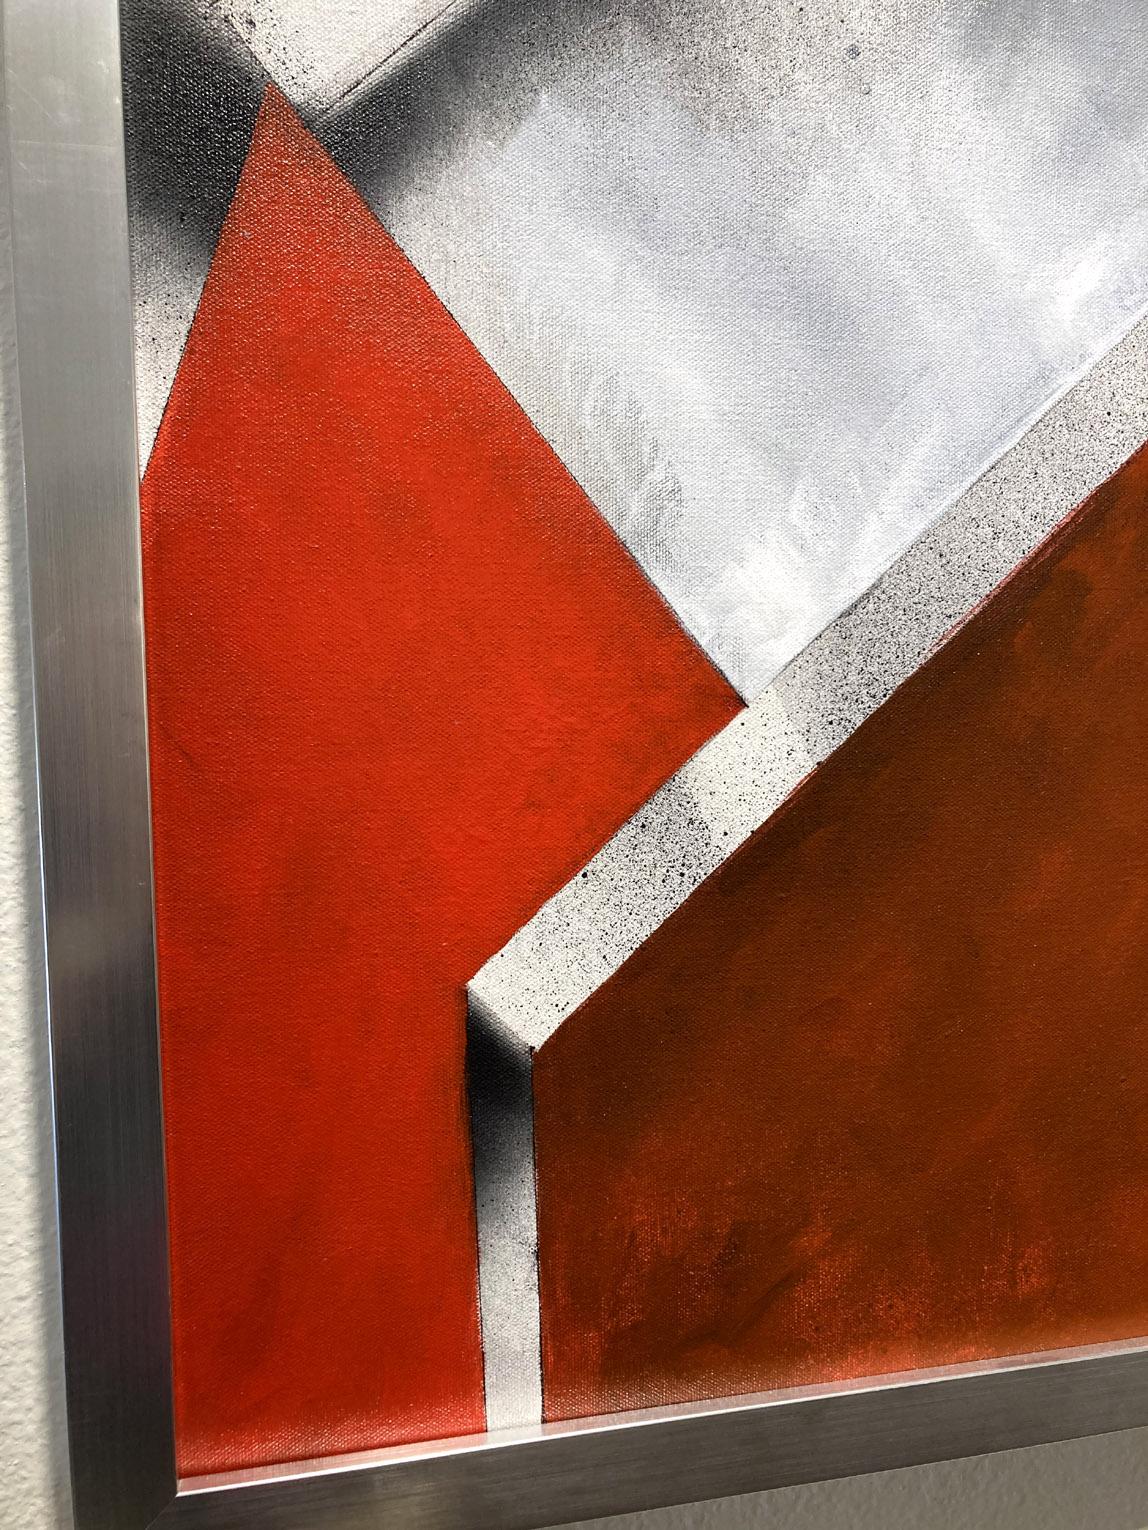 Oblique Construct, Red and Silver. - Painting by KOKO HOVAGUIMIAN